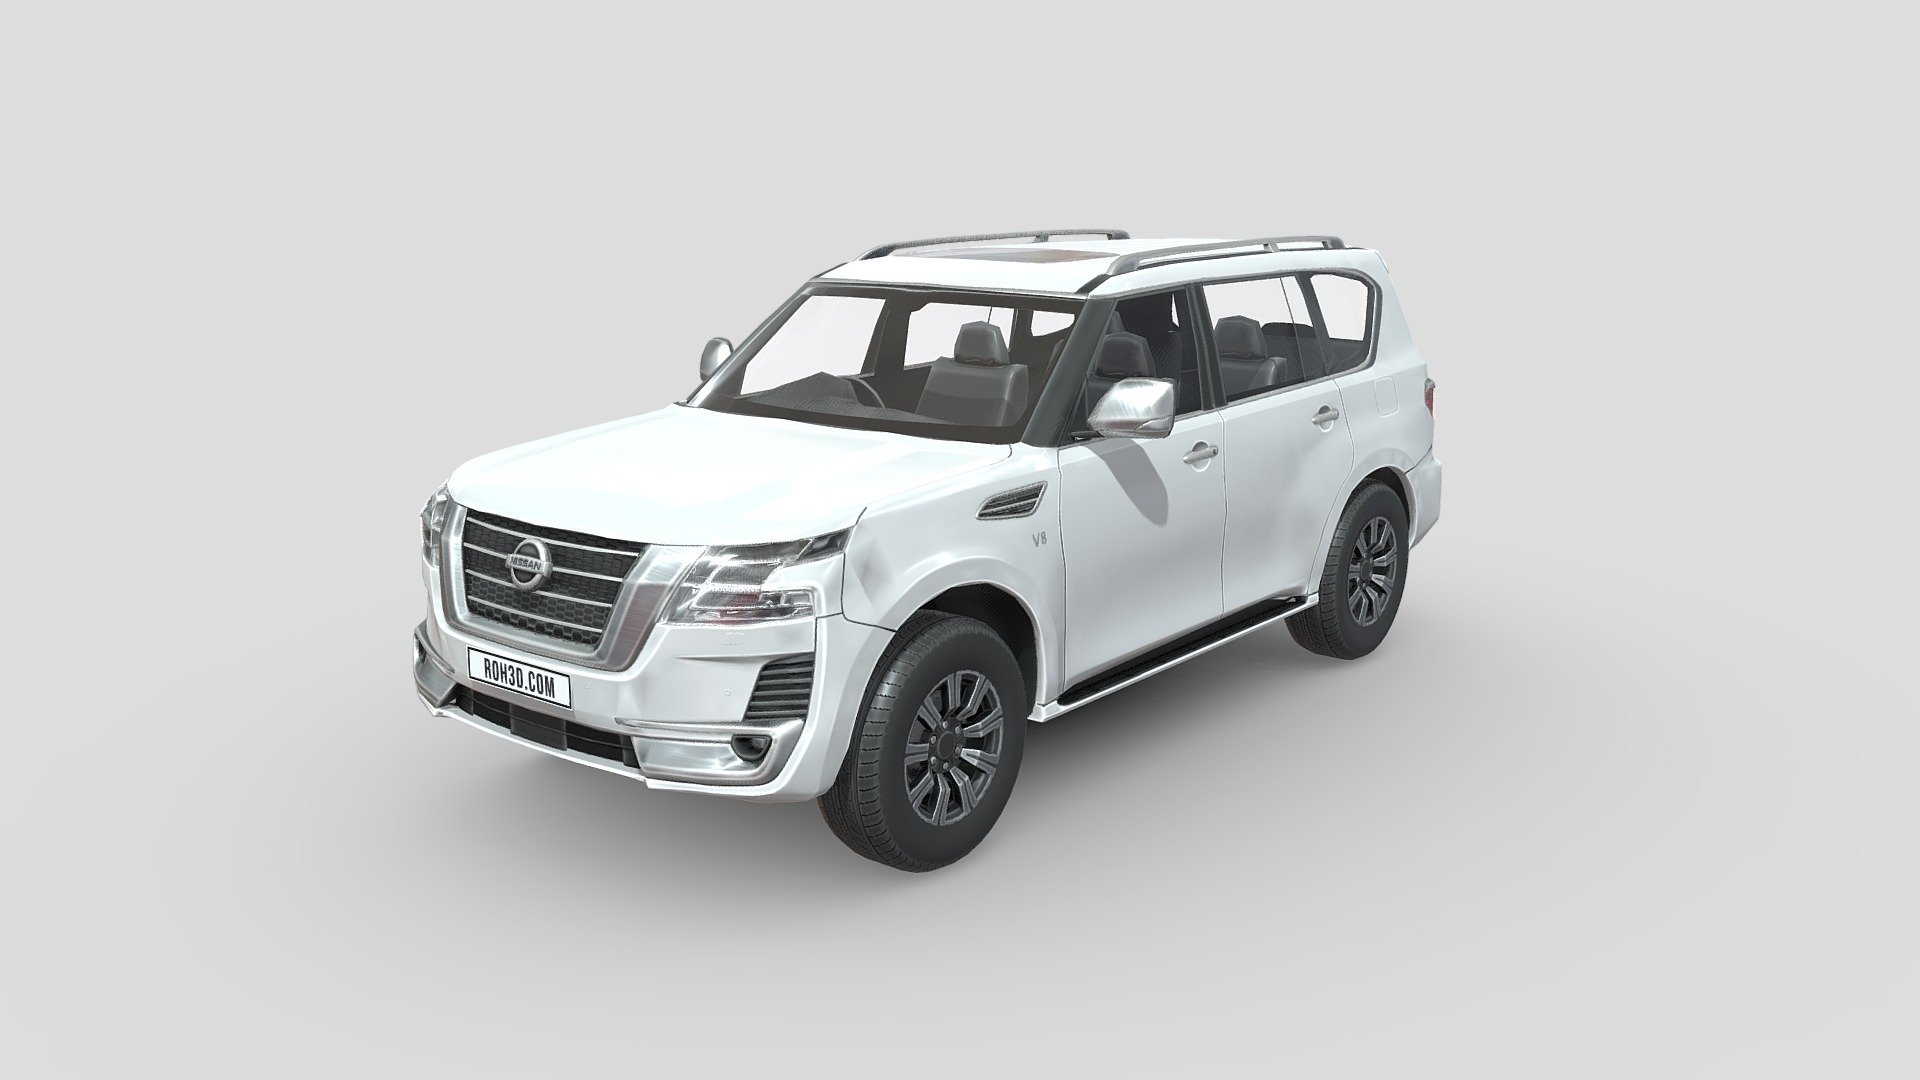 Low poly car - Nissan Patrol 2020.

The Nissan Patrol is a series of four-wheel drive vehicles manufactured by Nissan in Japan and sold throughout the world.

The Patrol has been available as either a short-wheelbase (SWB) three-door or a long-wheelbase (LWB) five-door chassis since 1951. The LWB version has been offered in pickup truck and cab chassis variants. Between 1988 and 1994, Ford Australia marketed the Patrol as the Ford Maverick. In some European countries, such as Spain, the Patrol was marketed by Ebro as the Ebro Patrol. In 1980 in Japan, it was rebadged and alternately sold at Nissan Prince Store locations as the Nissan Safari 3d model